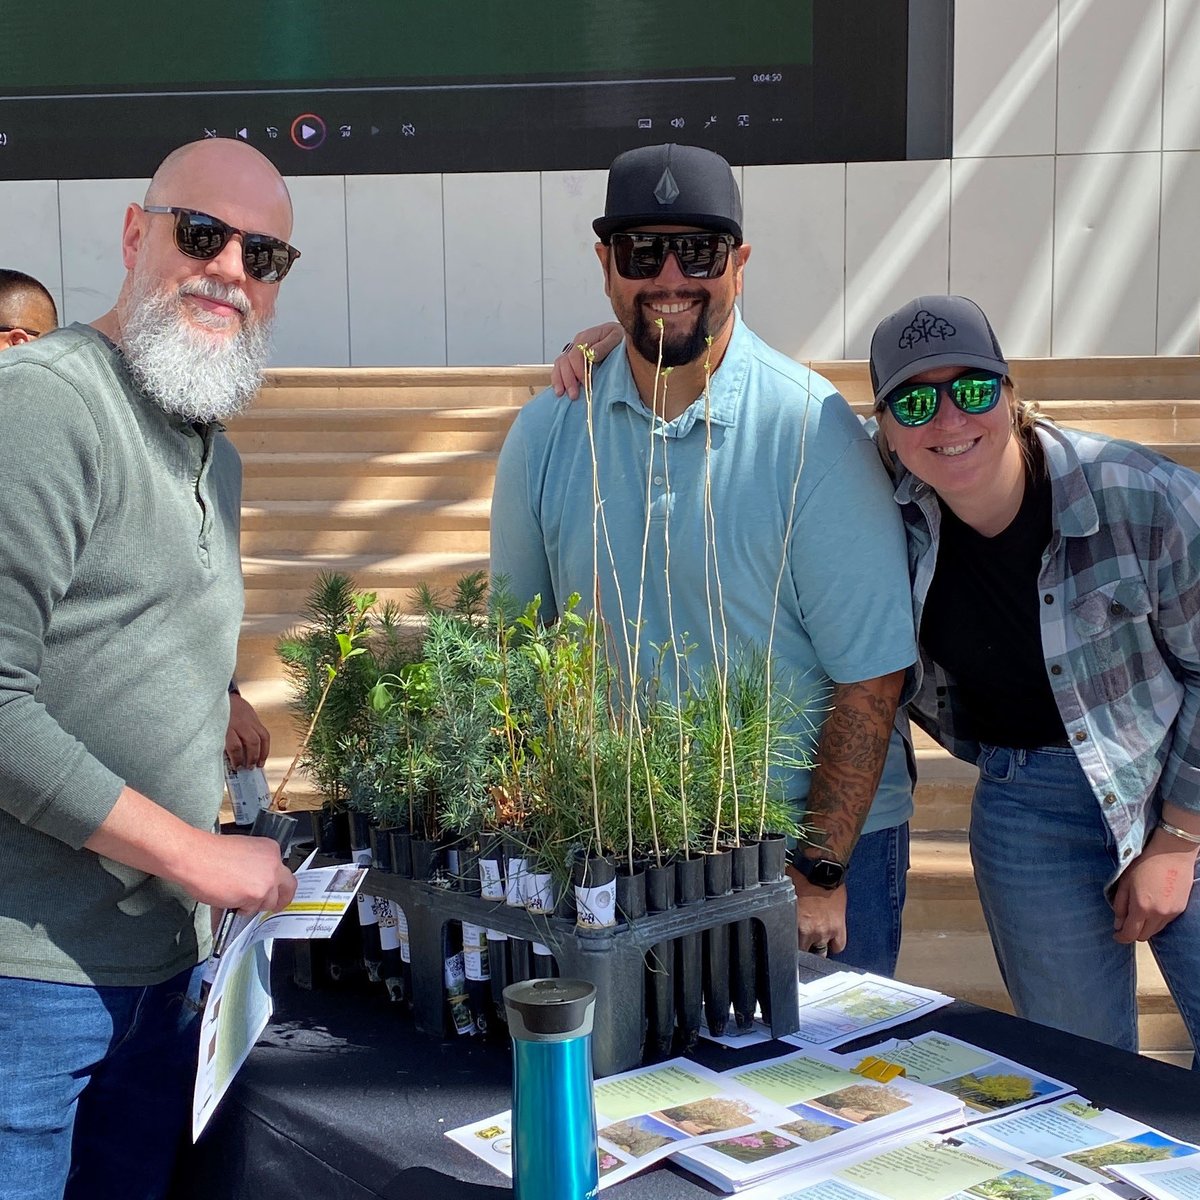 Thank you to everyone who came out to our Let's Plant Albuquerque event to celebrate Arbor Day! Our @cabqparks team with community members & partners planted trees & gave away trees on Civic Plaza. Trees cool the urban core & provide quality of life benefits. #OneAlbuquerque